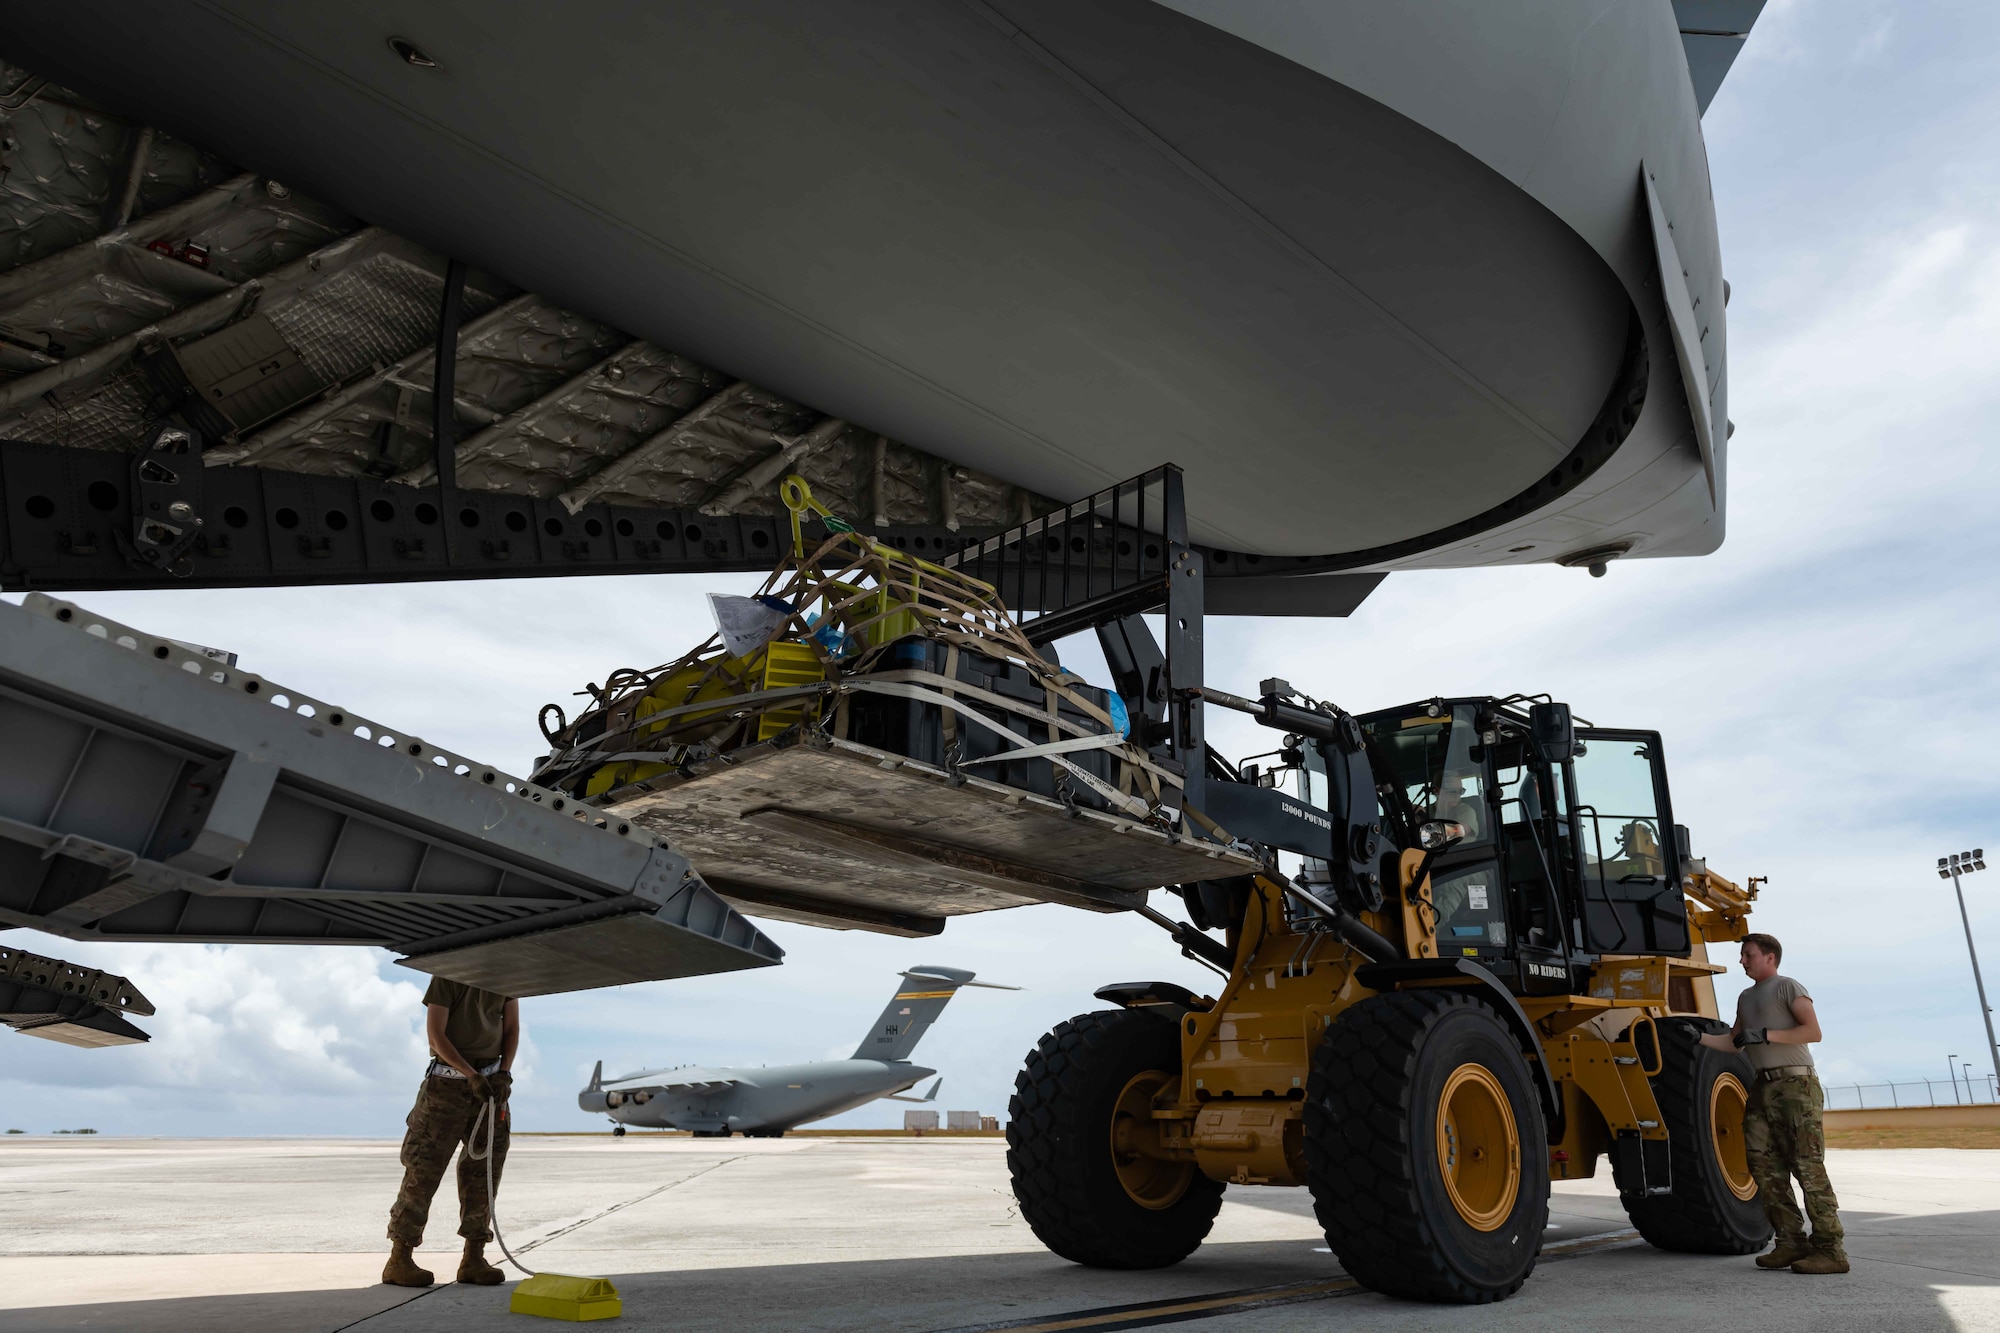 U.S. Air Force Airmen load a pallet onto a C-17 Globemaster III at Andersen Air Force Base, Guam, during exercise Resilient Typhoon, April 23, 2019. The exercise was designed to practice dispersal operations from Andersen to airfields throughout Micronesia. (U.S. Air Force photo by Airman 1st Class Matthew Seefeldt)